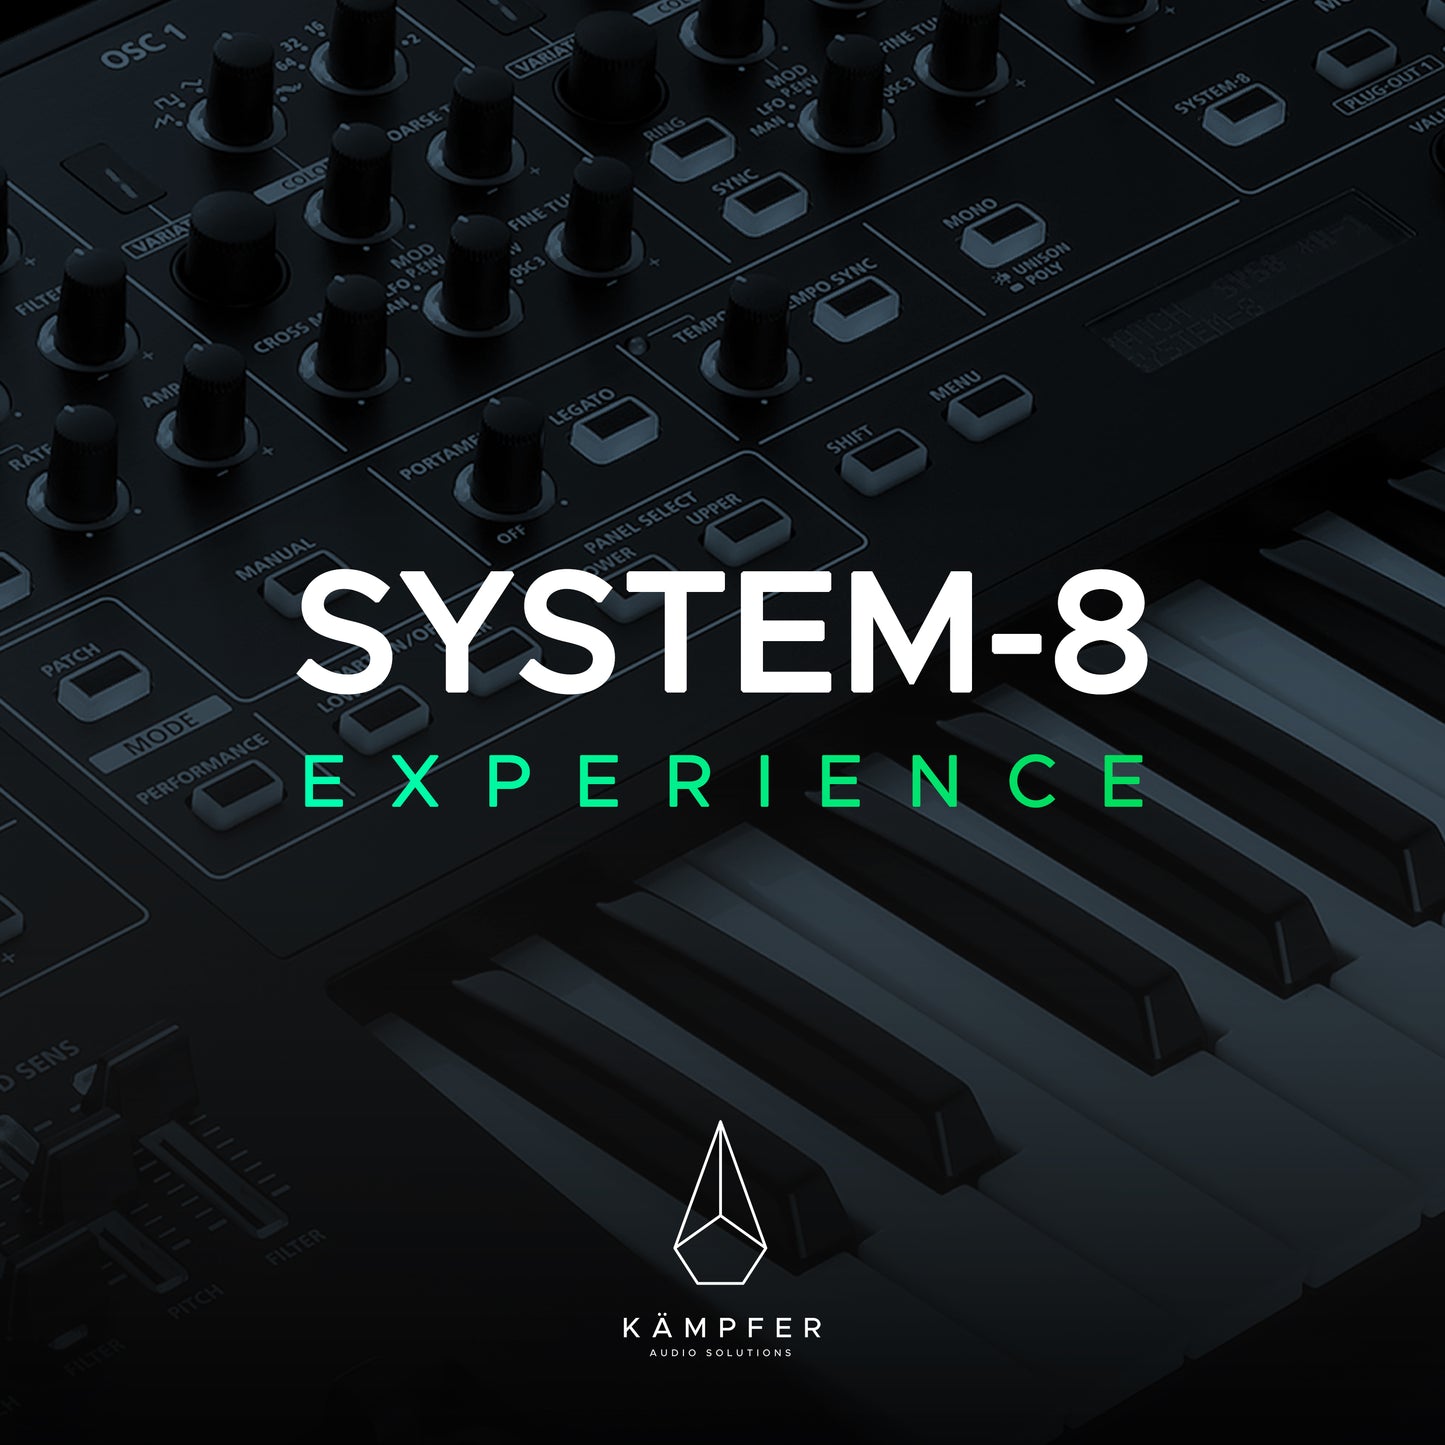 SYSTEM-8 EXPERIENCE